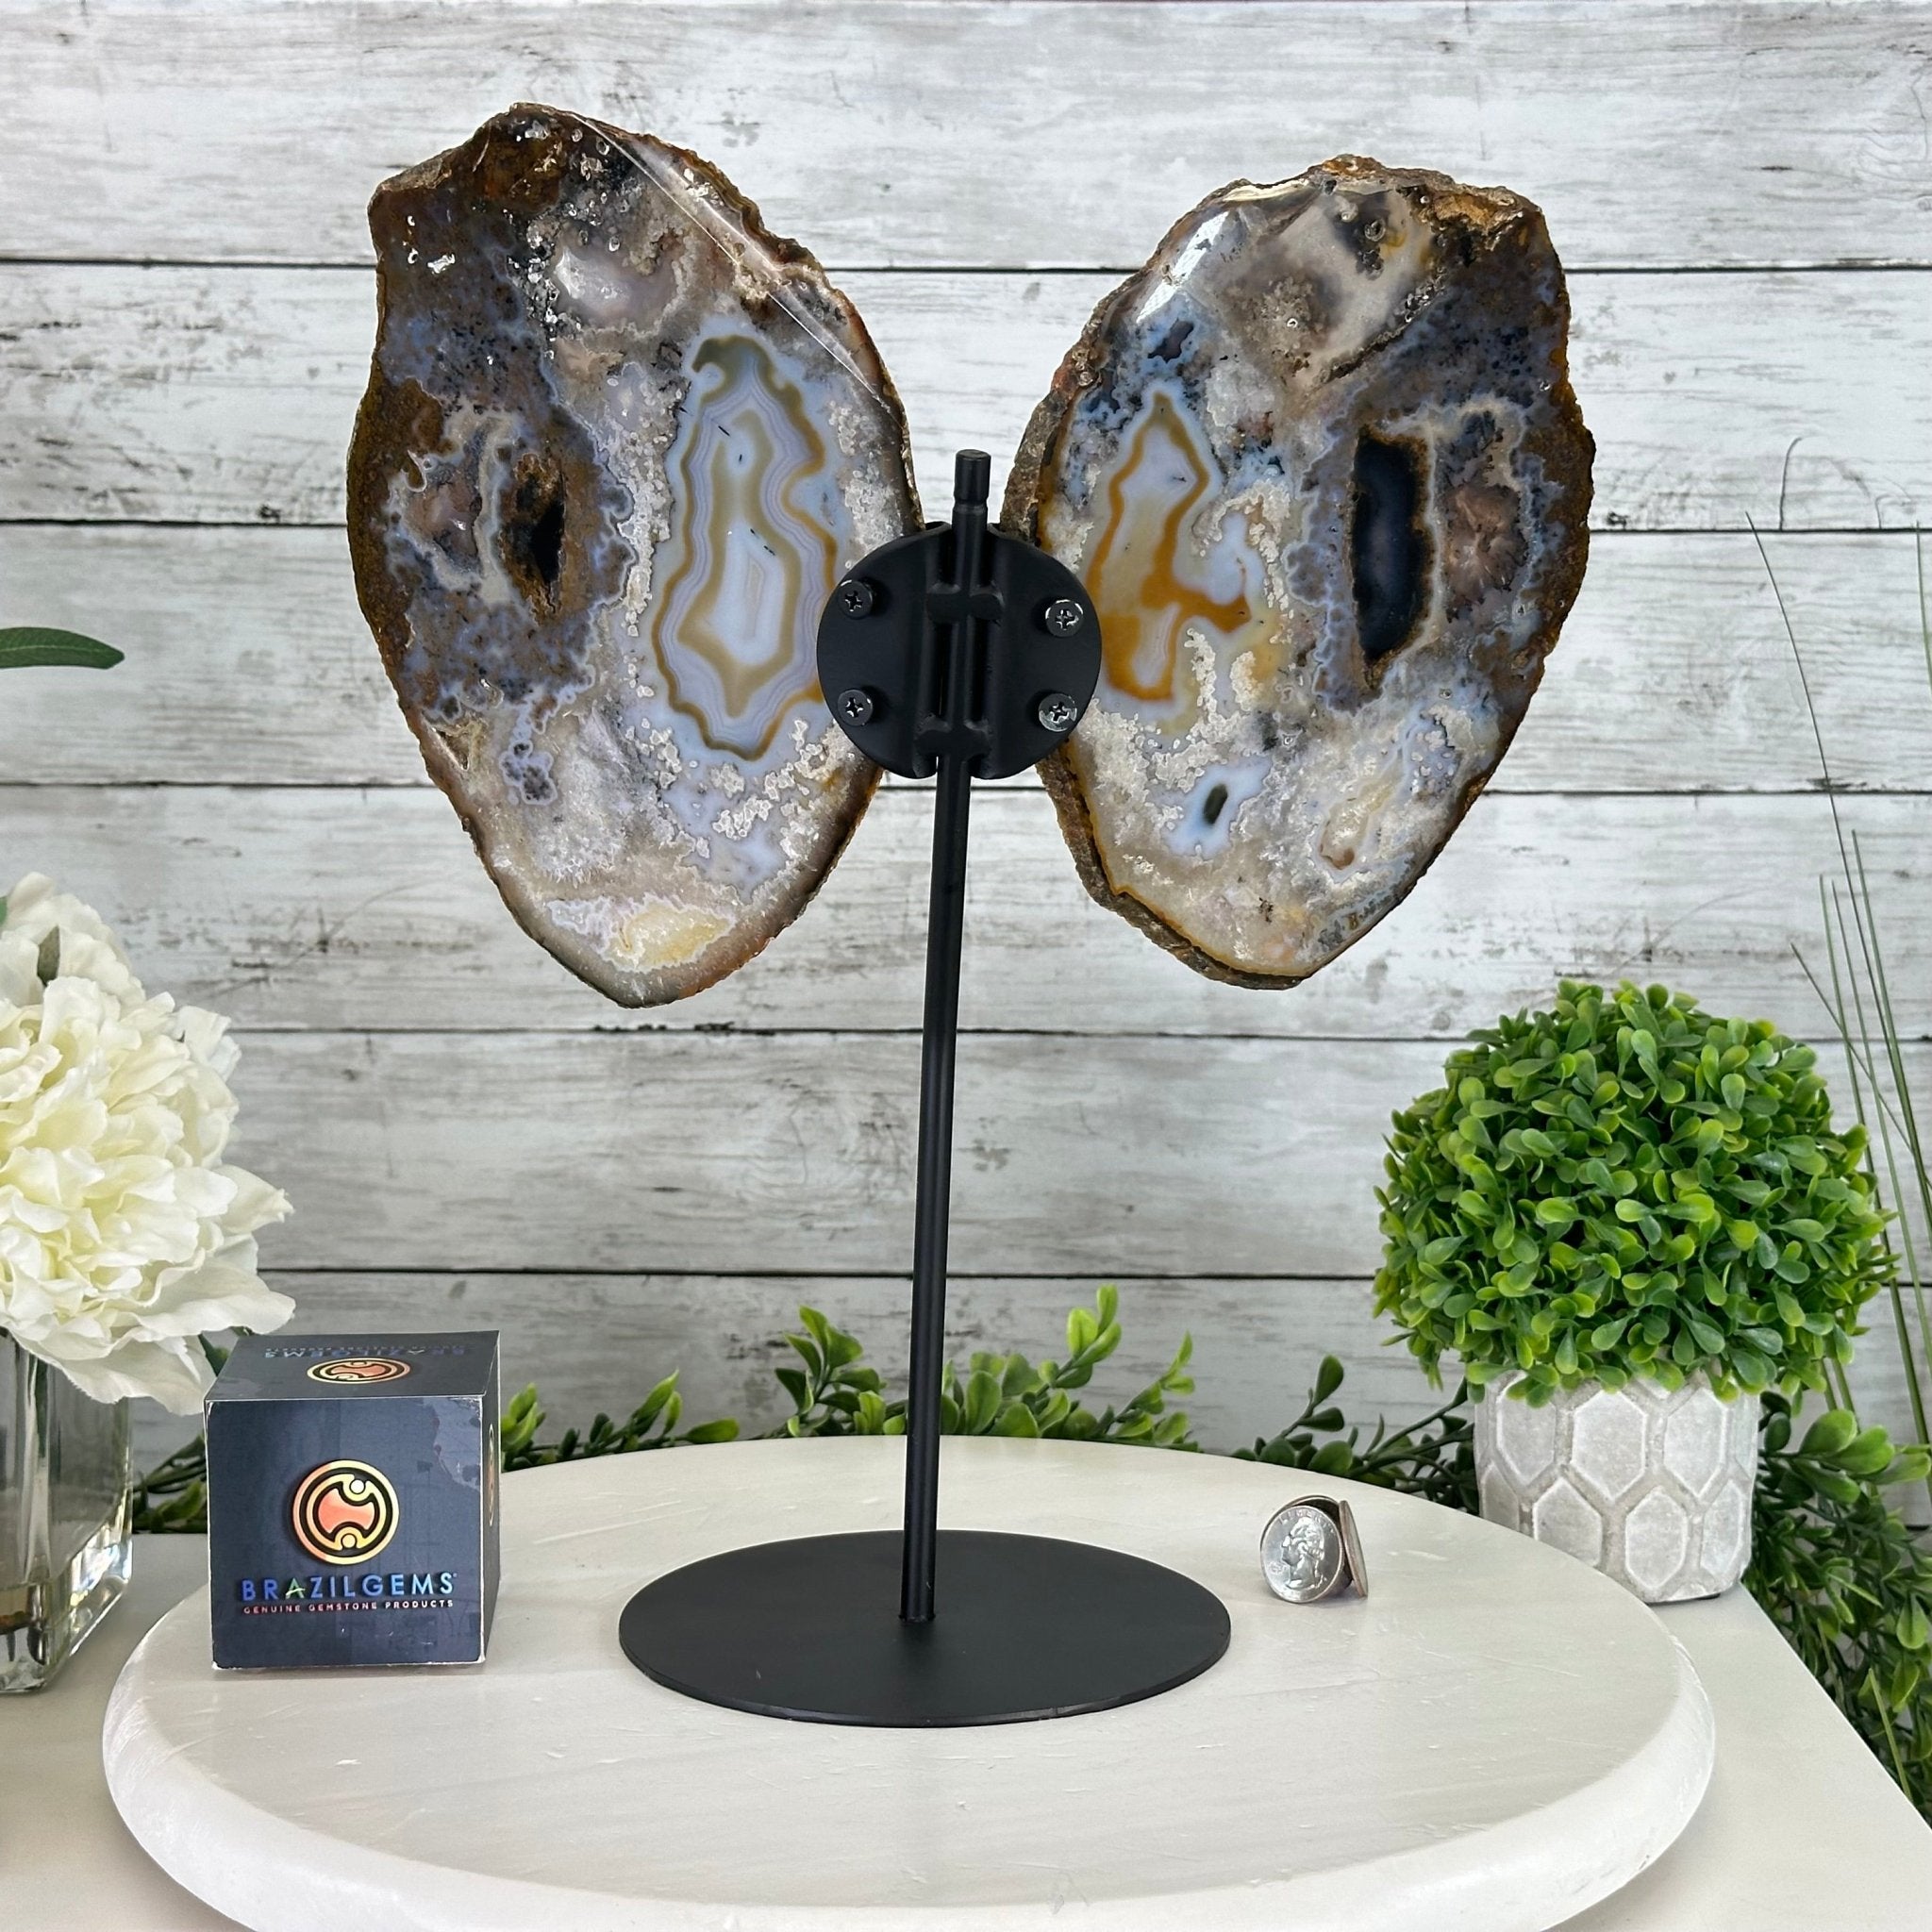 Natural Brazilian Agate "Butterfly Wings", 14.25" Tall #5050NA-079 - Brazil GemsBrazil GemsNatural Brazilian Agate "Butterfly Wings", 14.25" Tall #5050NA-079Agate Butterfly Wings5050NA-079